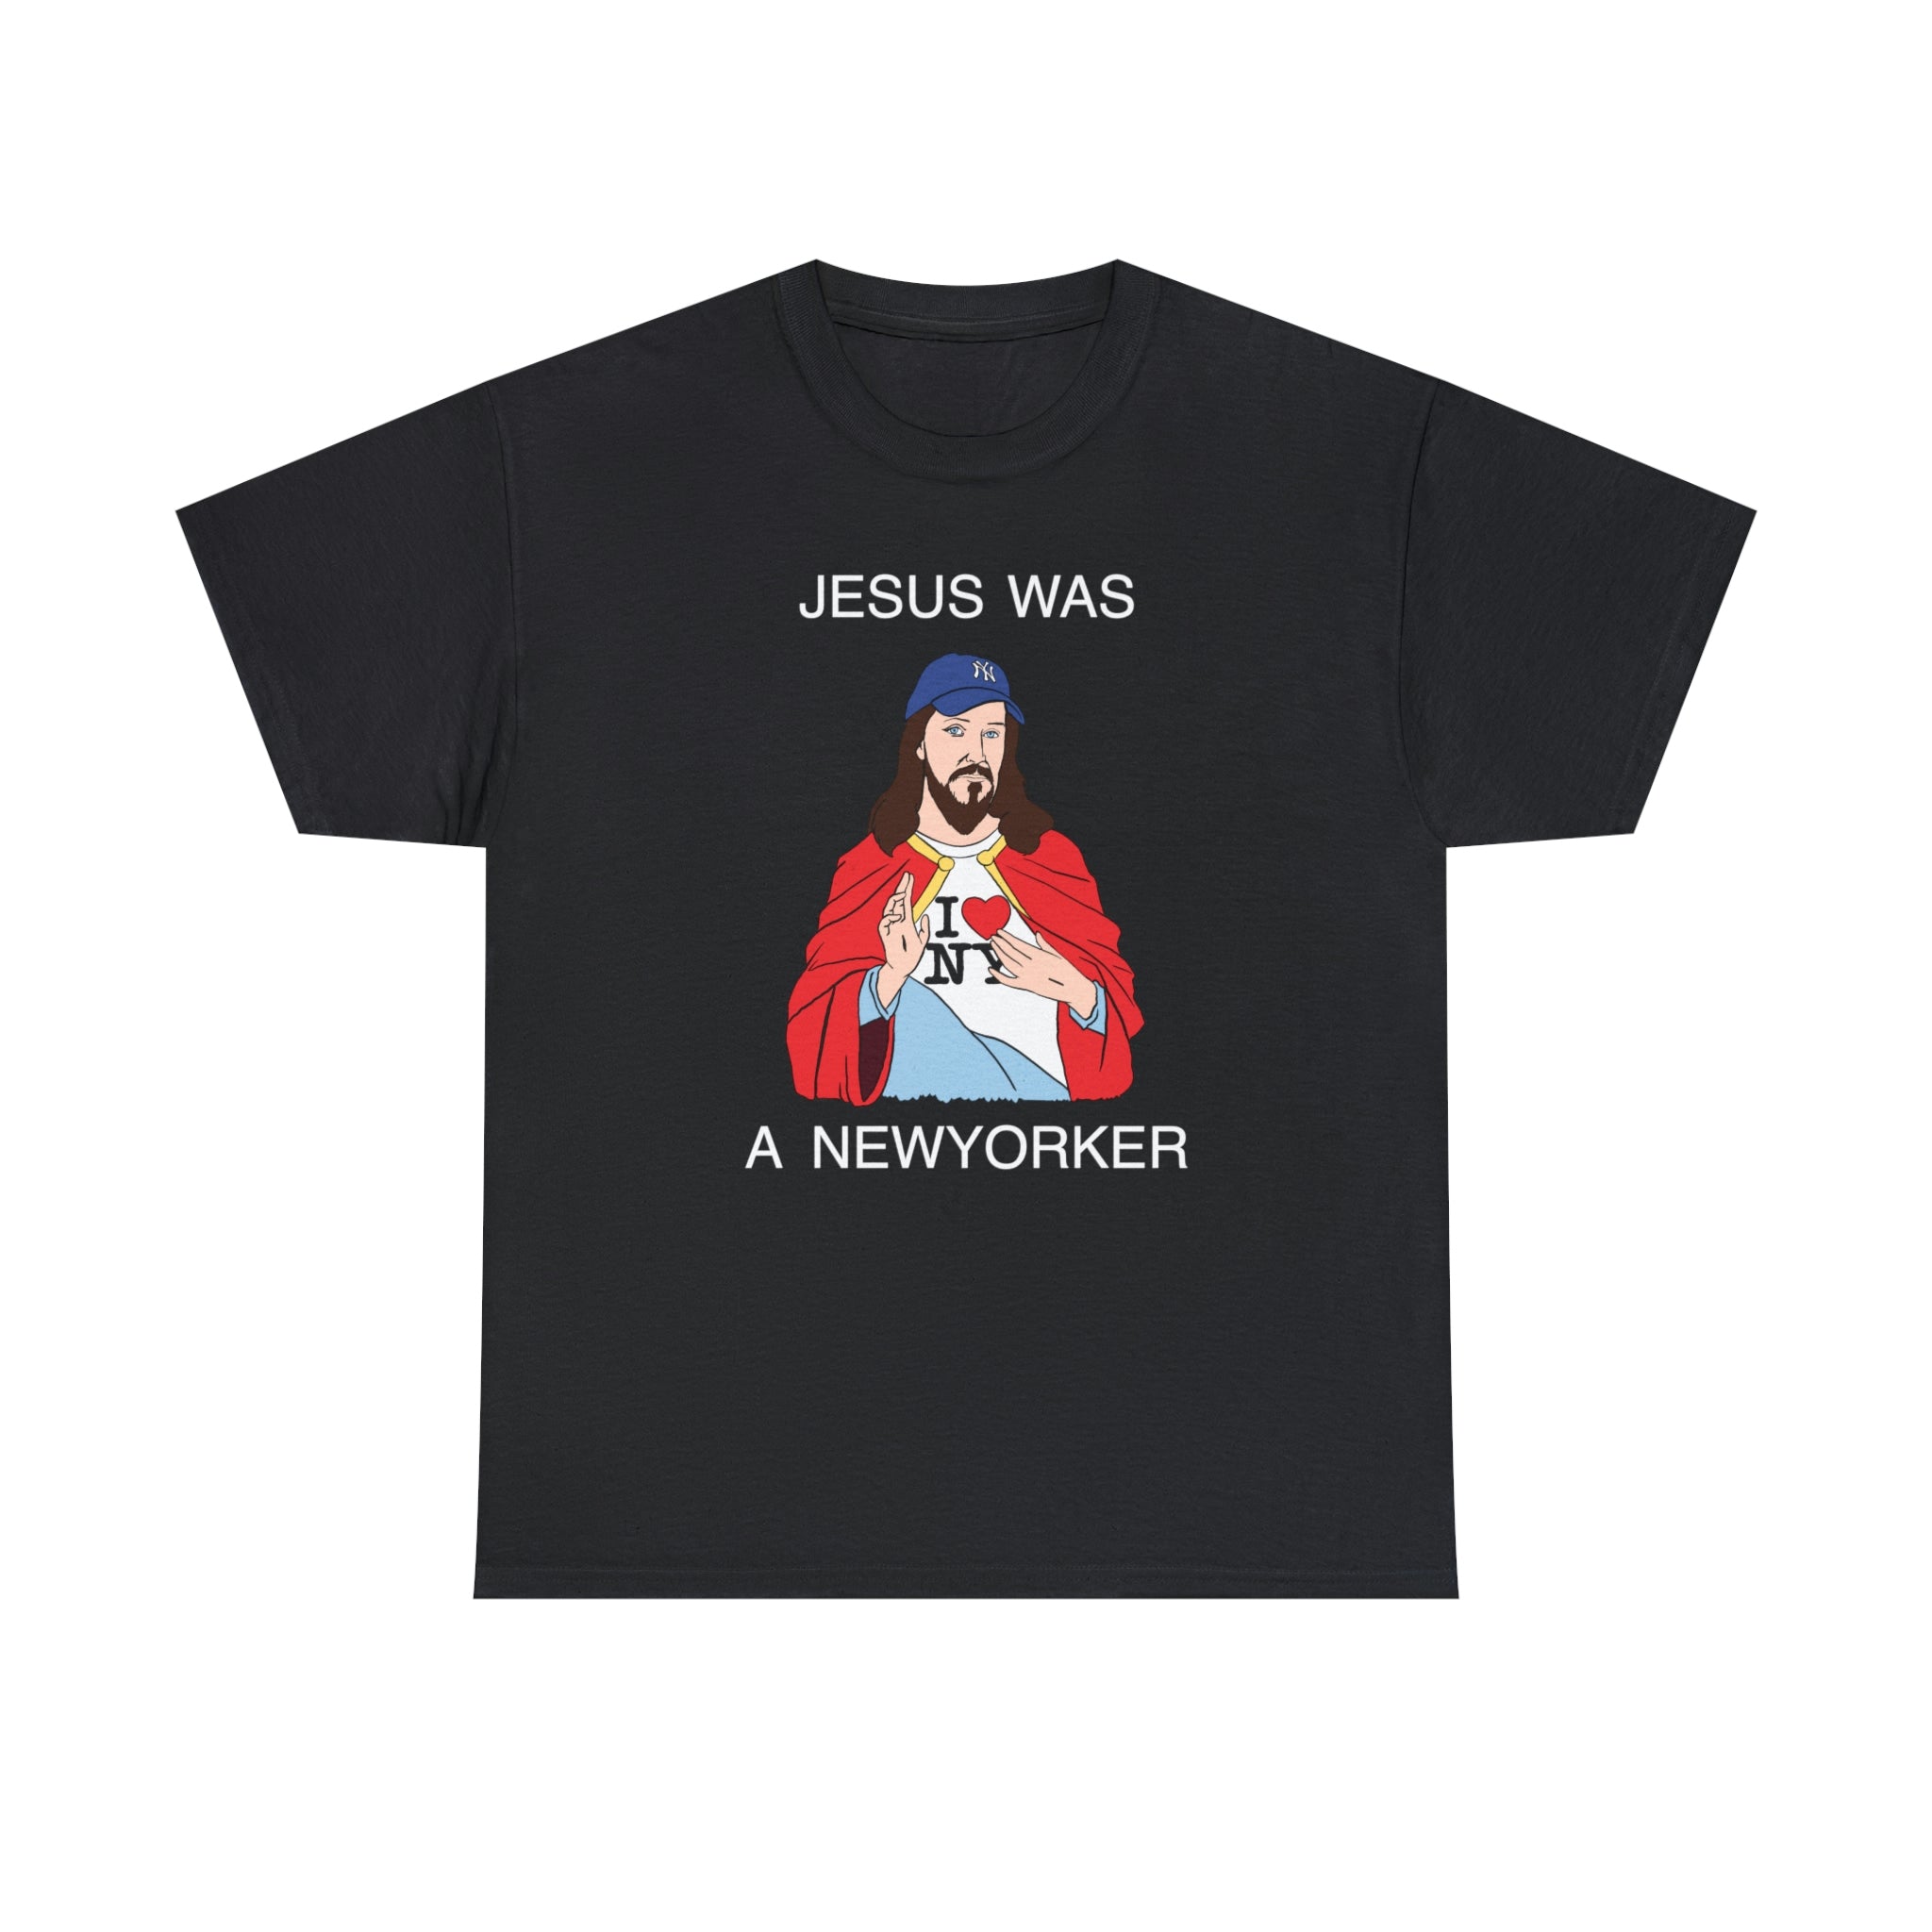 “Jesus was a New Yorker” t